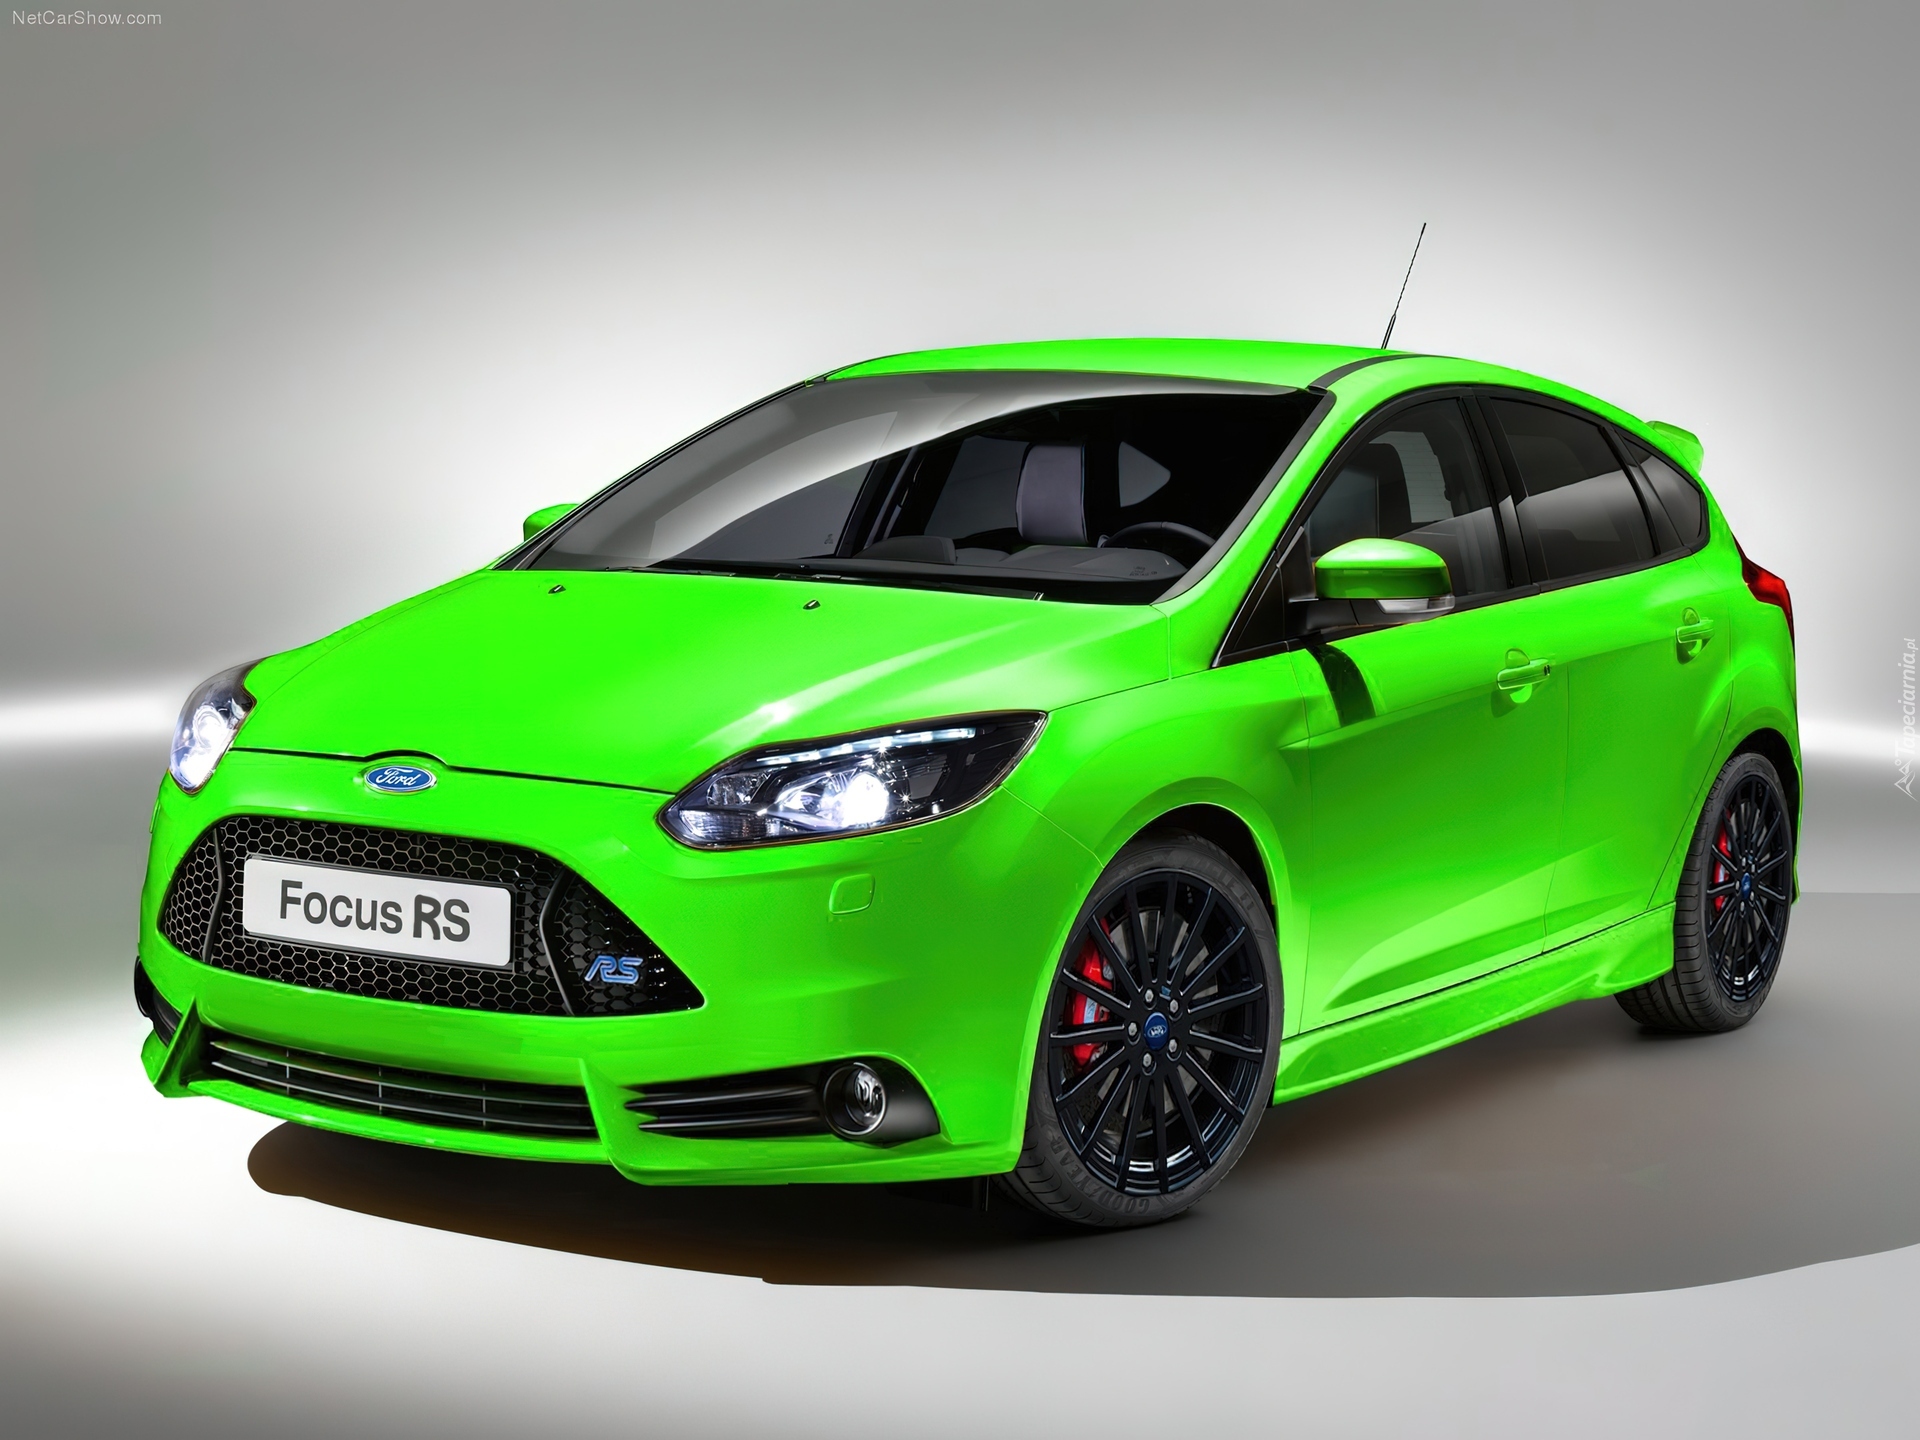 Edycja Tapety Focus MK3, Ford, RS